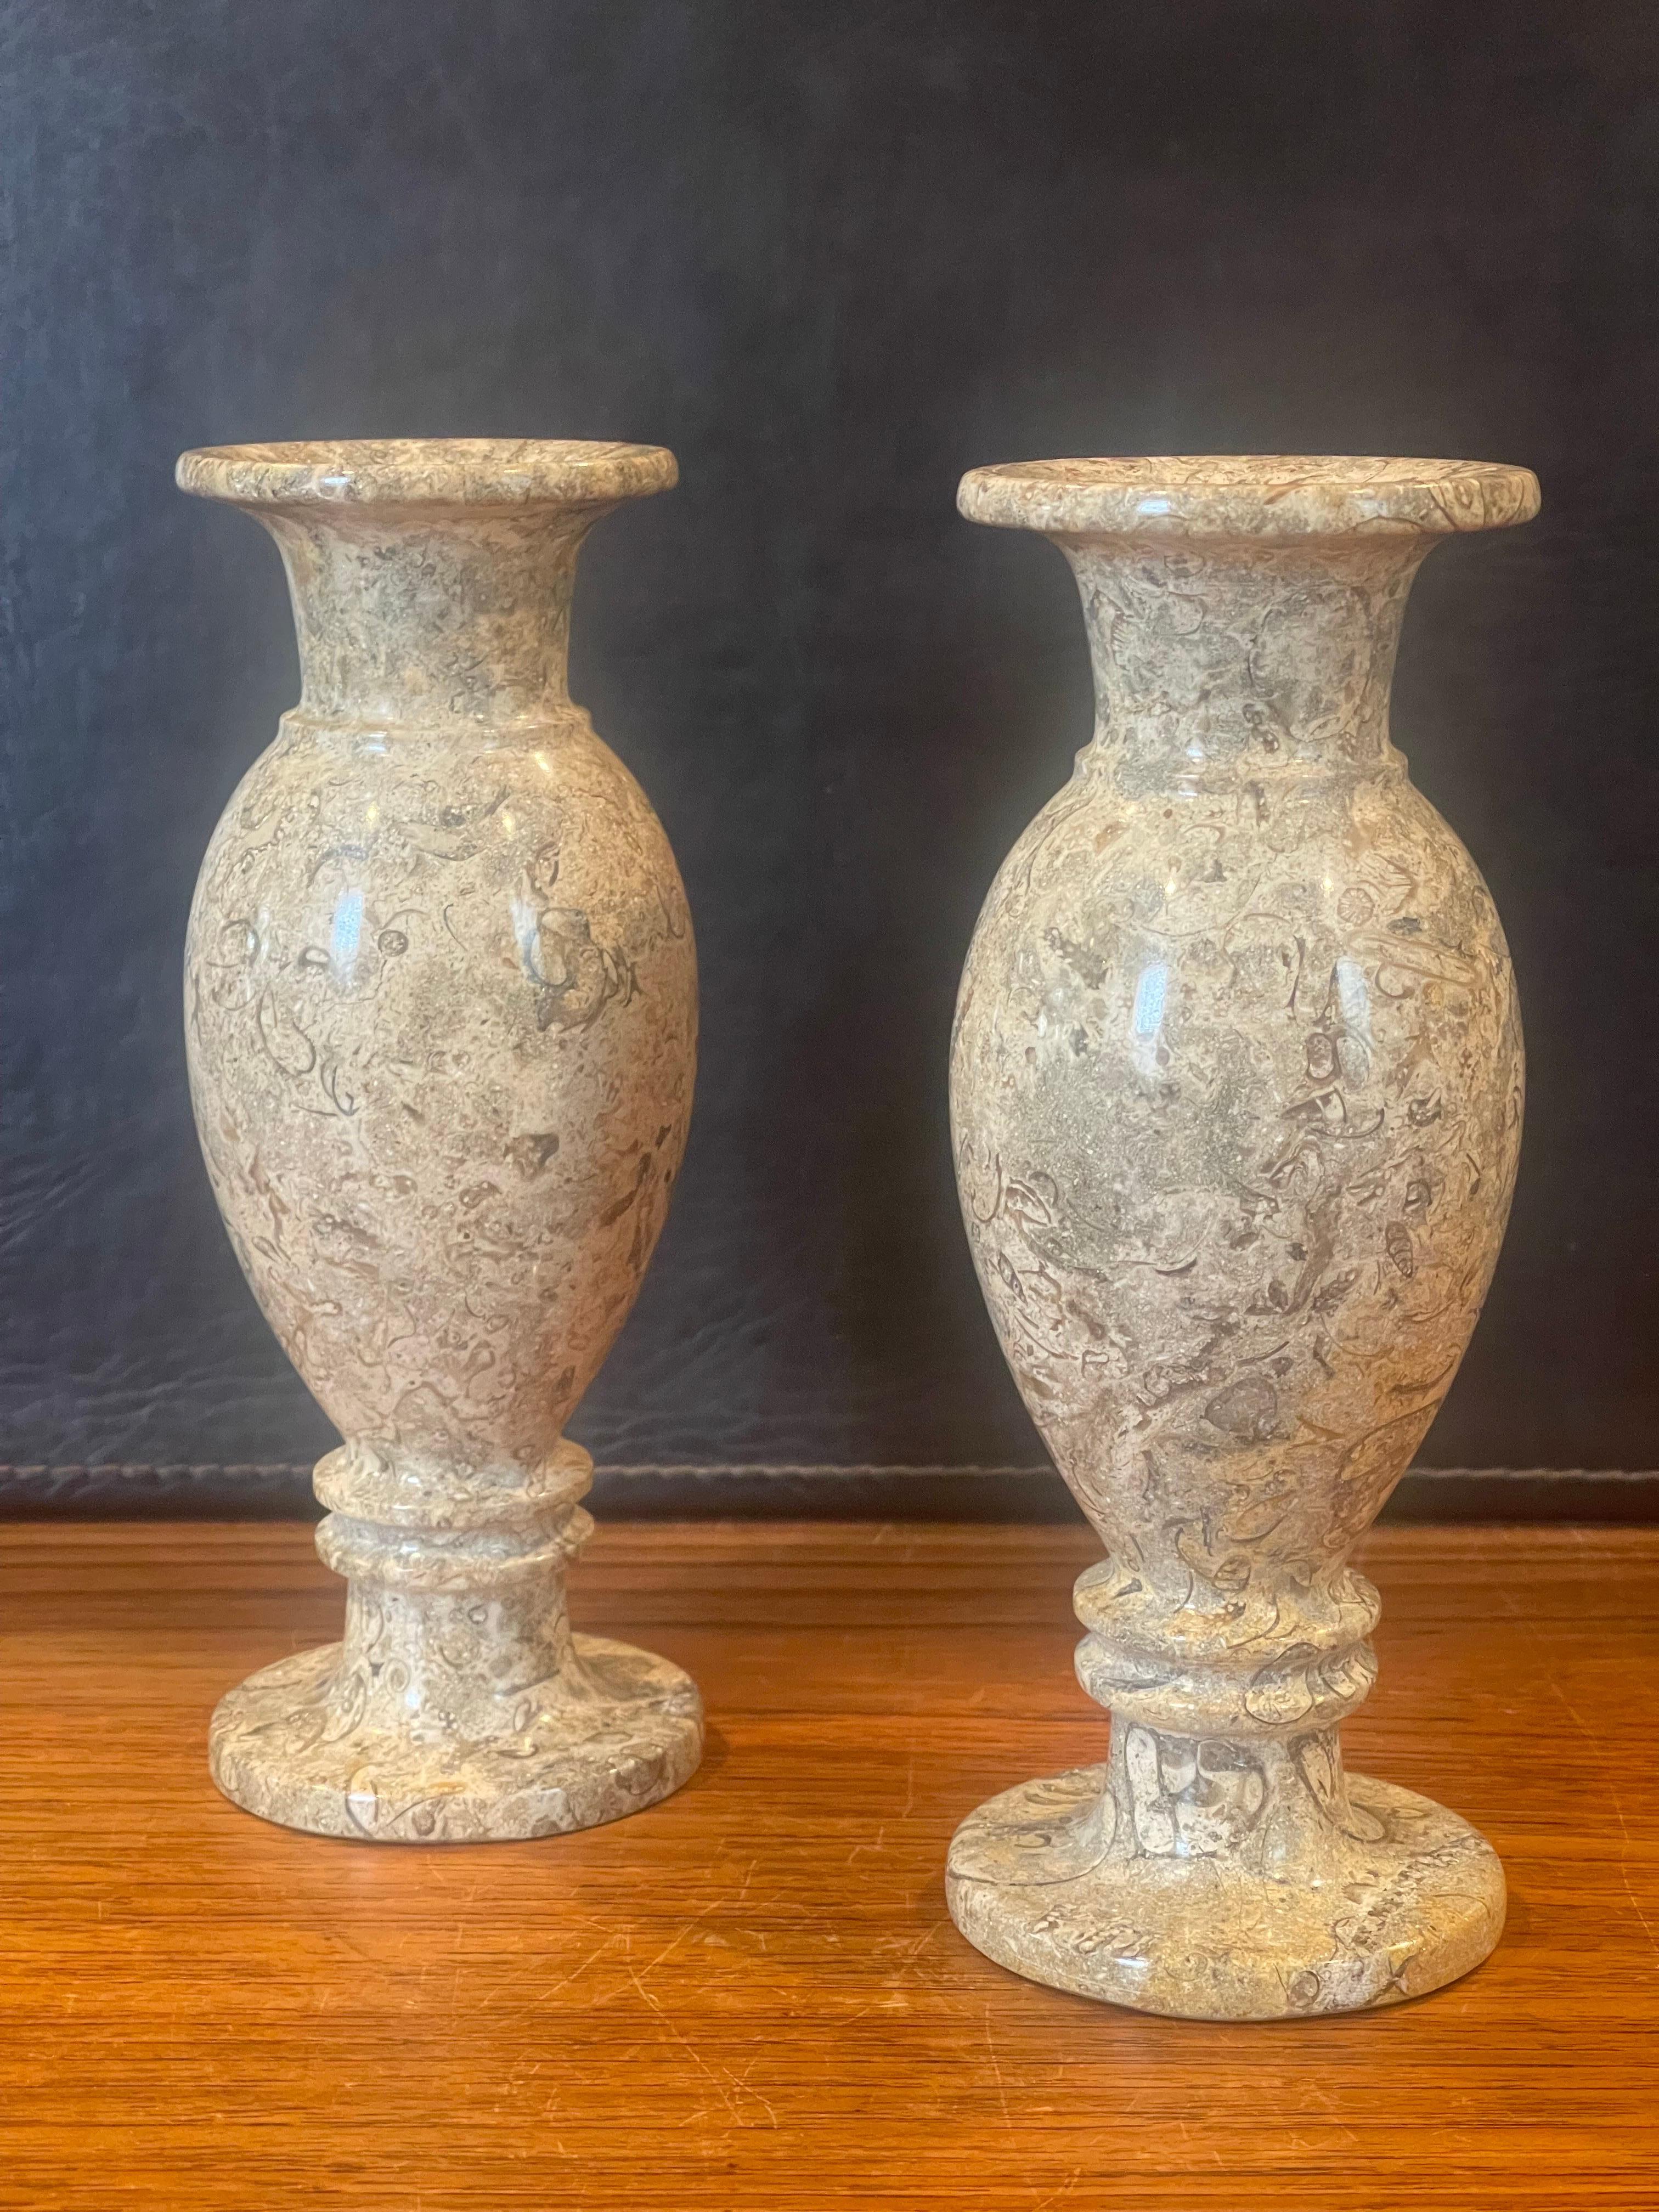 Gorgeous pair of postmodern Italian marble vases, circa 1970s. Striking tan, brown, white and cream fleck throughout each vase. The pair are in very good vintage condition with no chips or cracks and measure 3